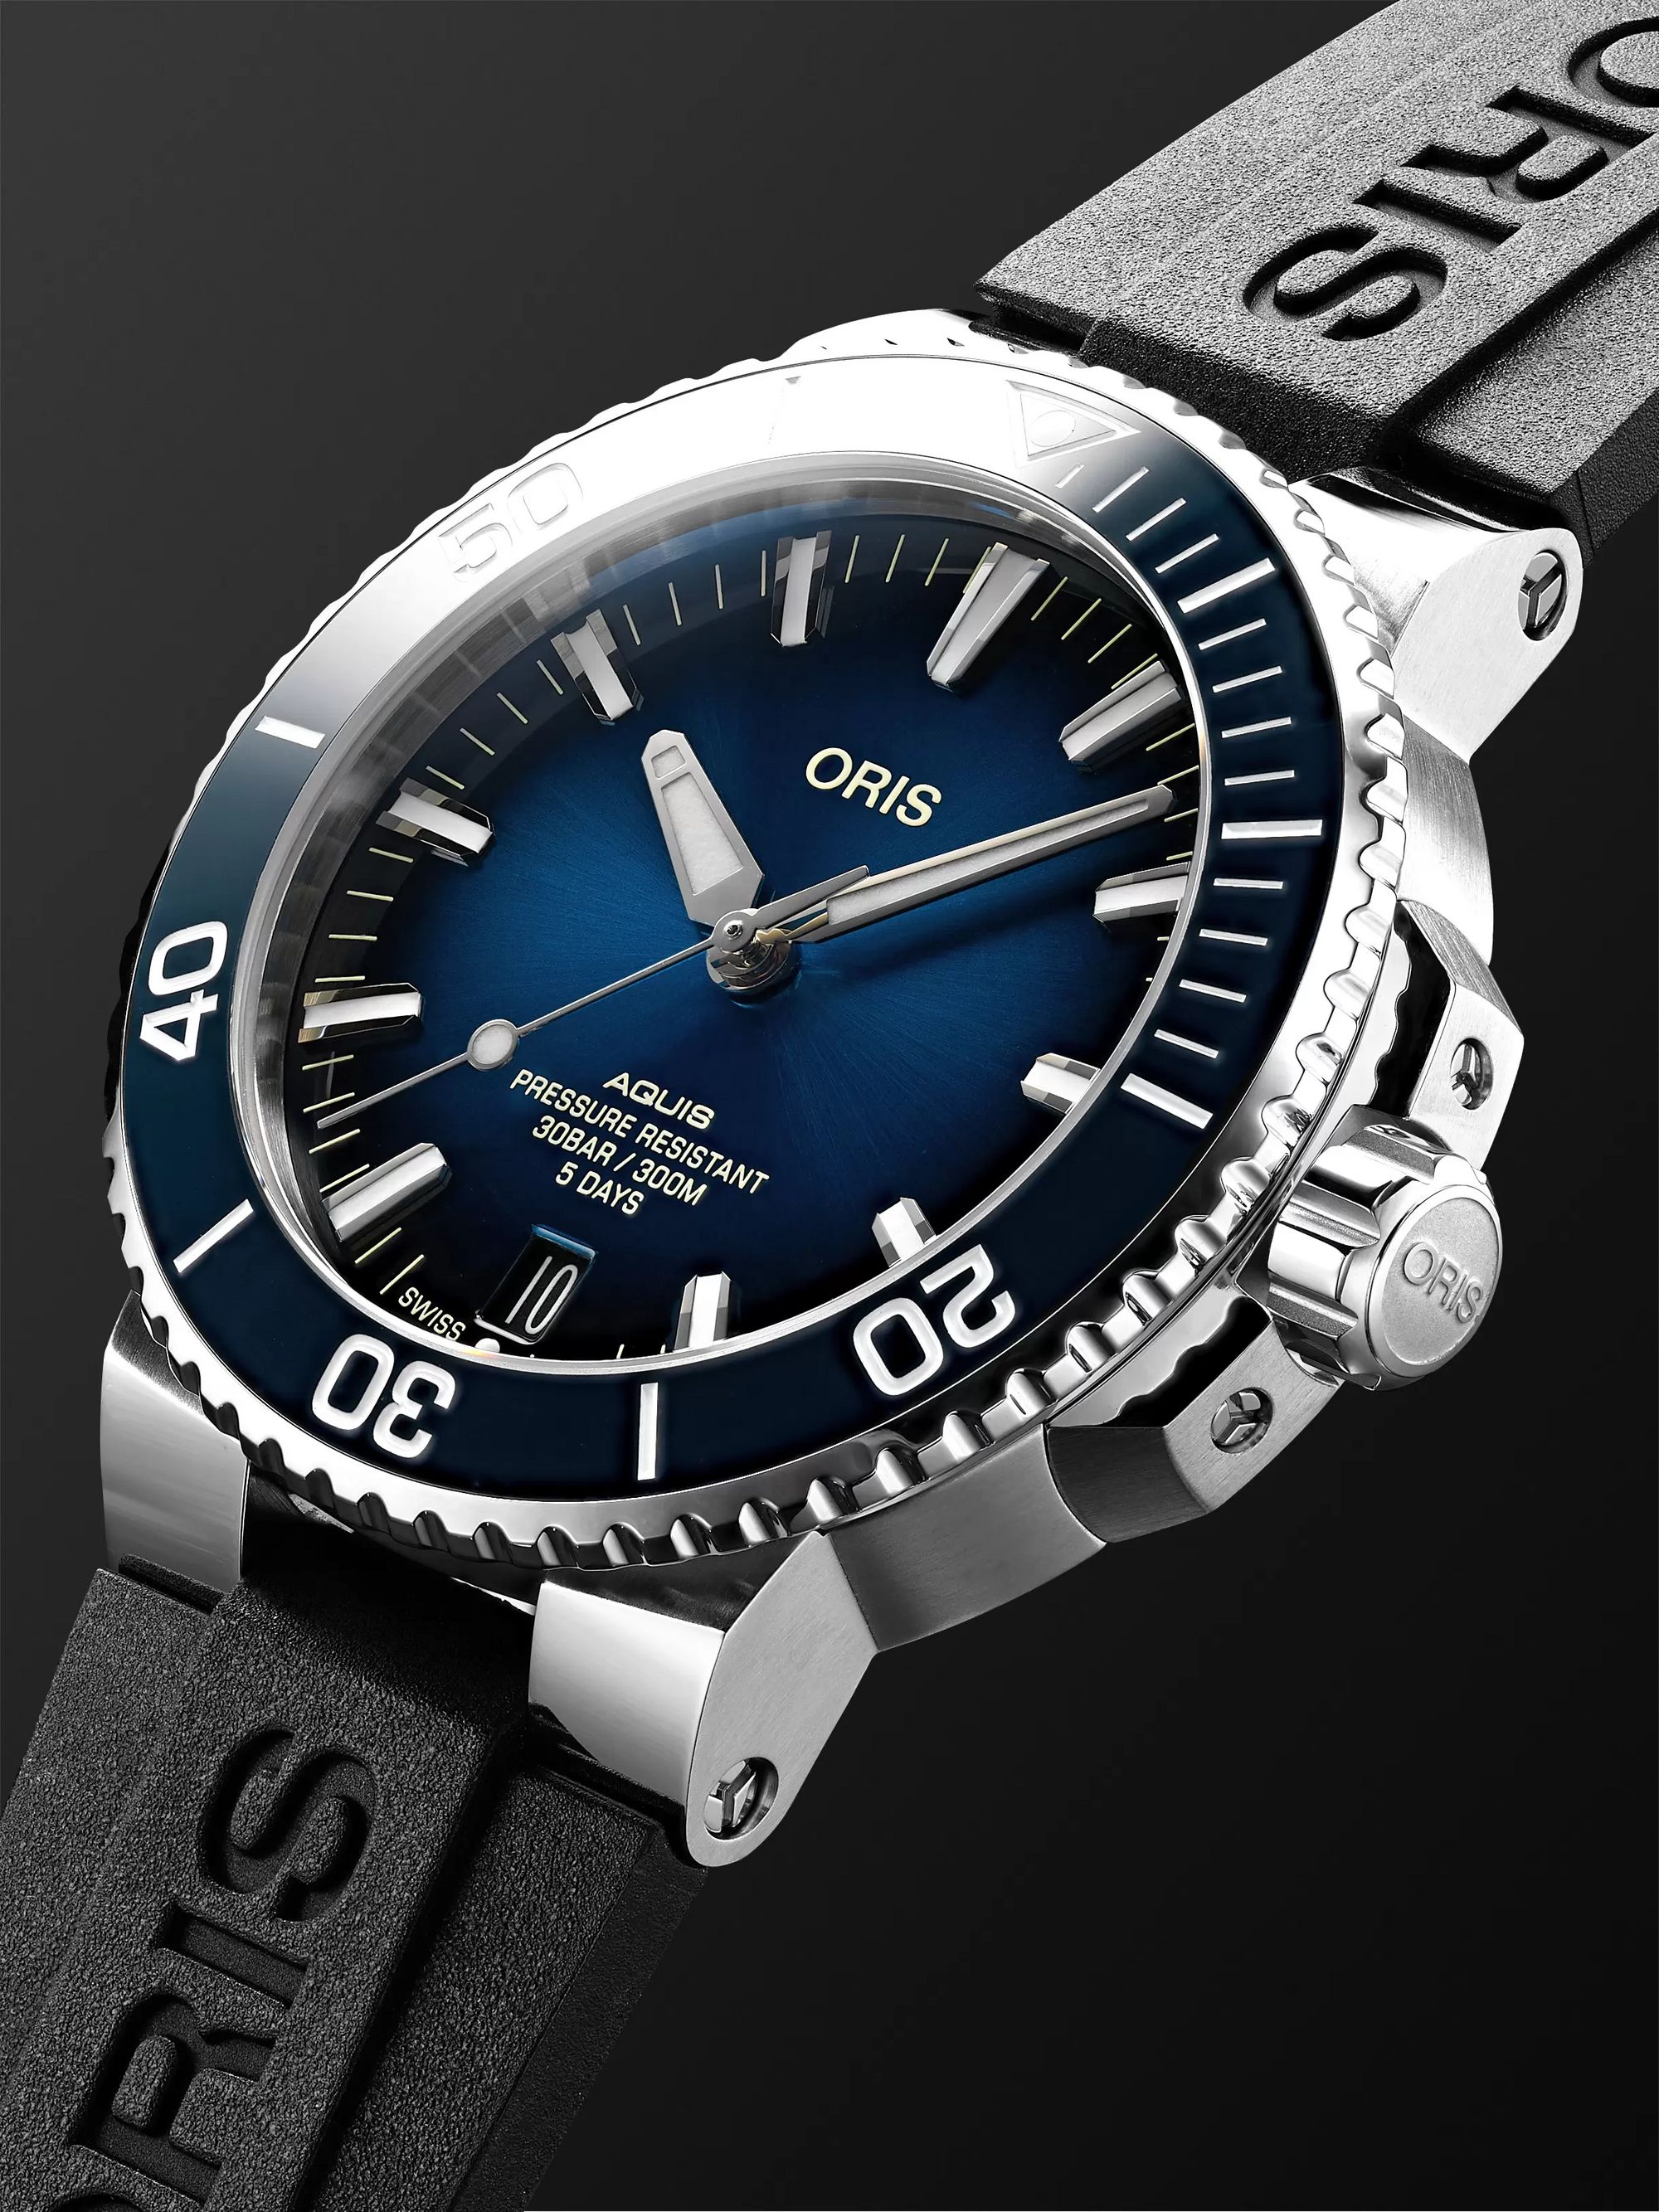 ORIS Aquis Date Calibre 400 Automatic 43.5mm Stainless Steel and Rubber Watch, Ref. No. 01 400 7763 4135-07 4 24 74EB